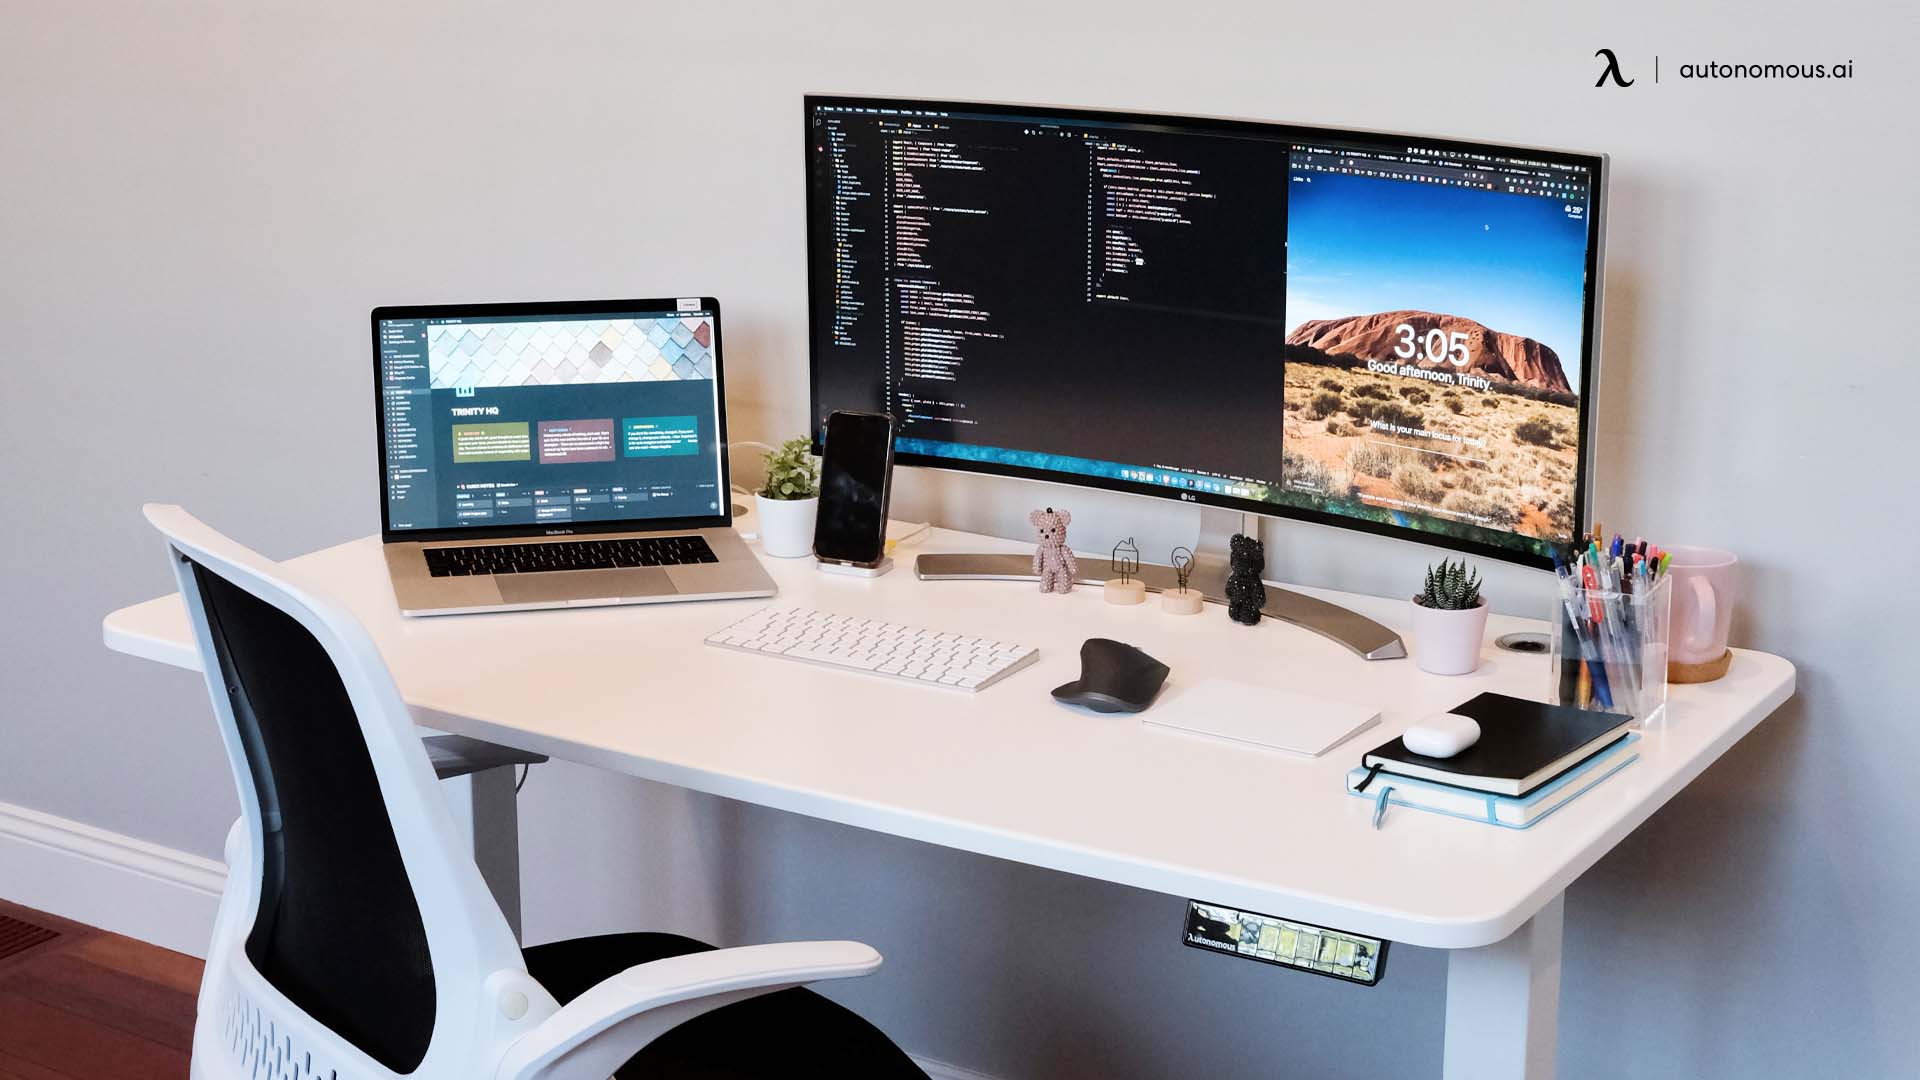 9 Tips to Use SmartDesk Properly and How to Fix Problems